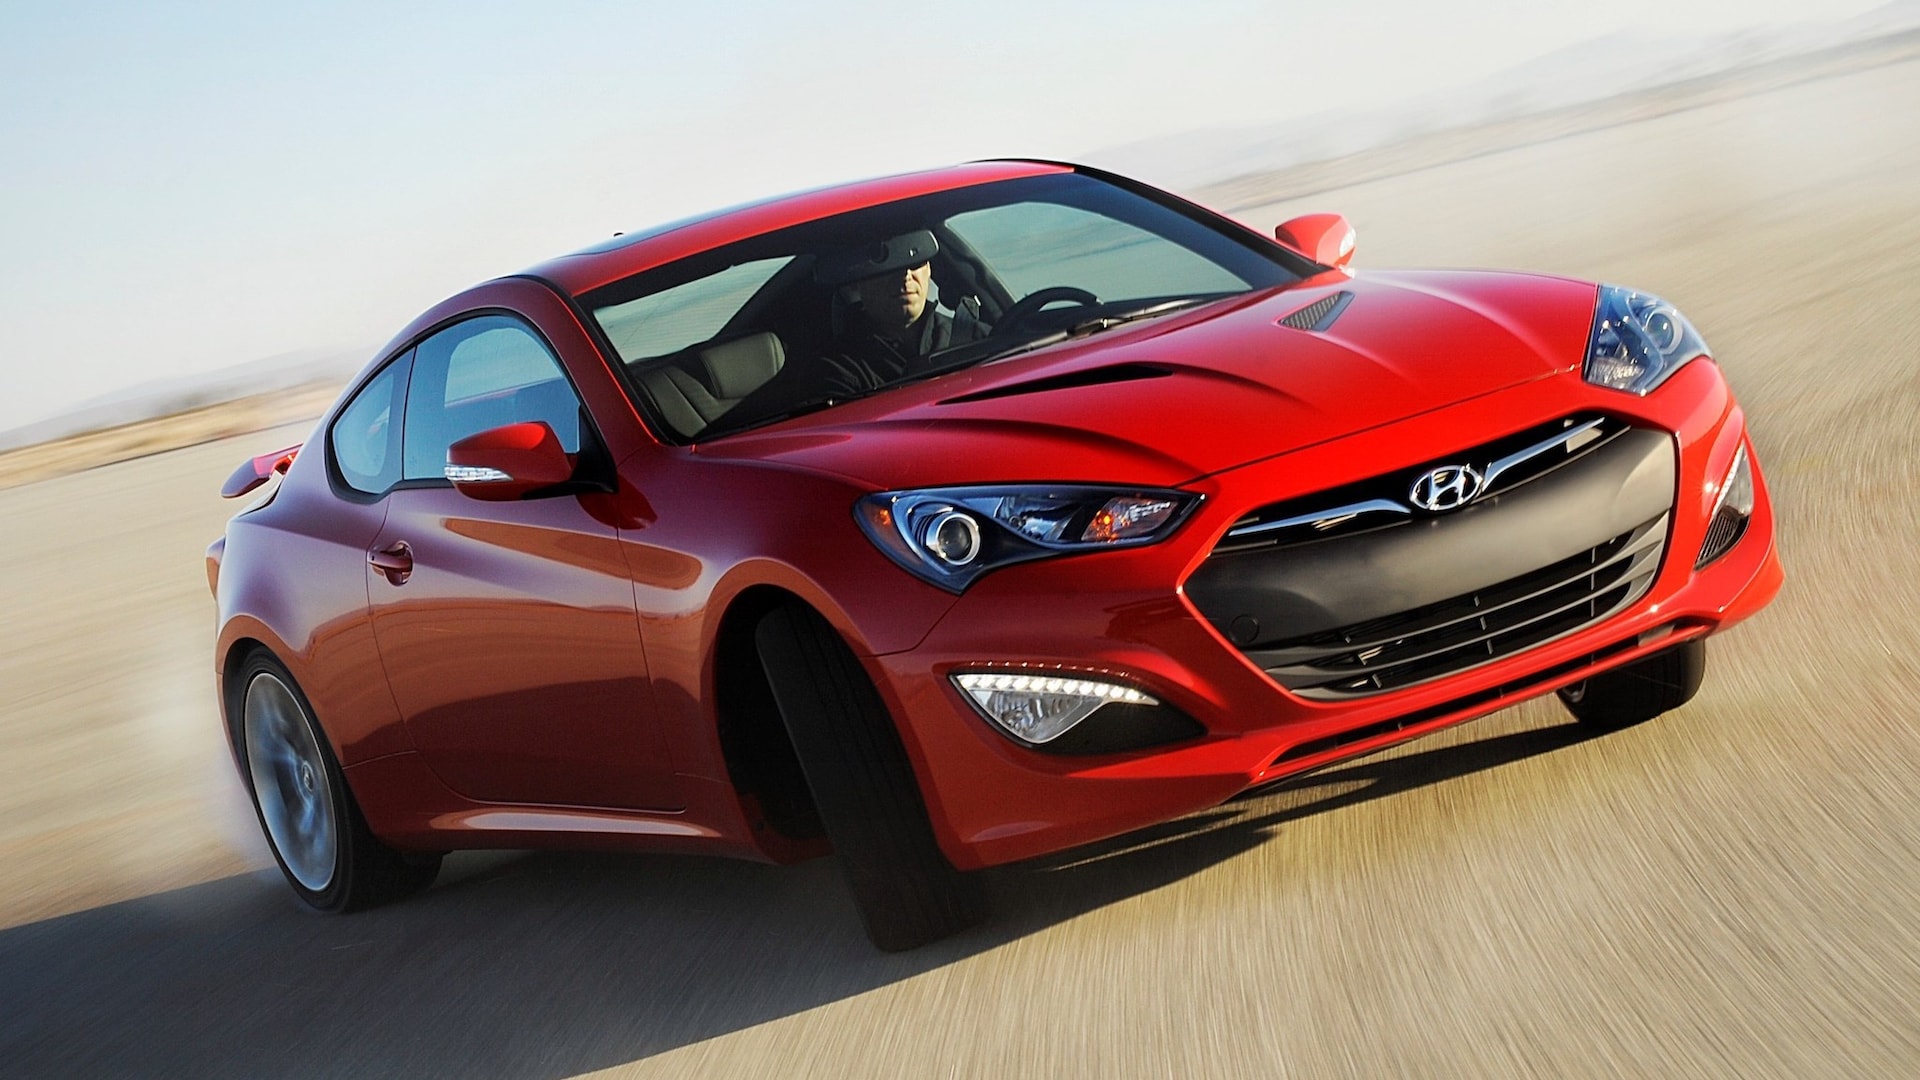 Hyundai's Product Planner Wants a Genesis Coupe Revival